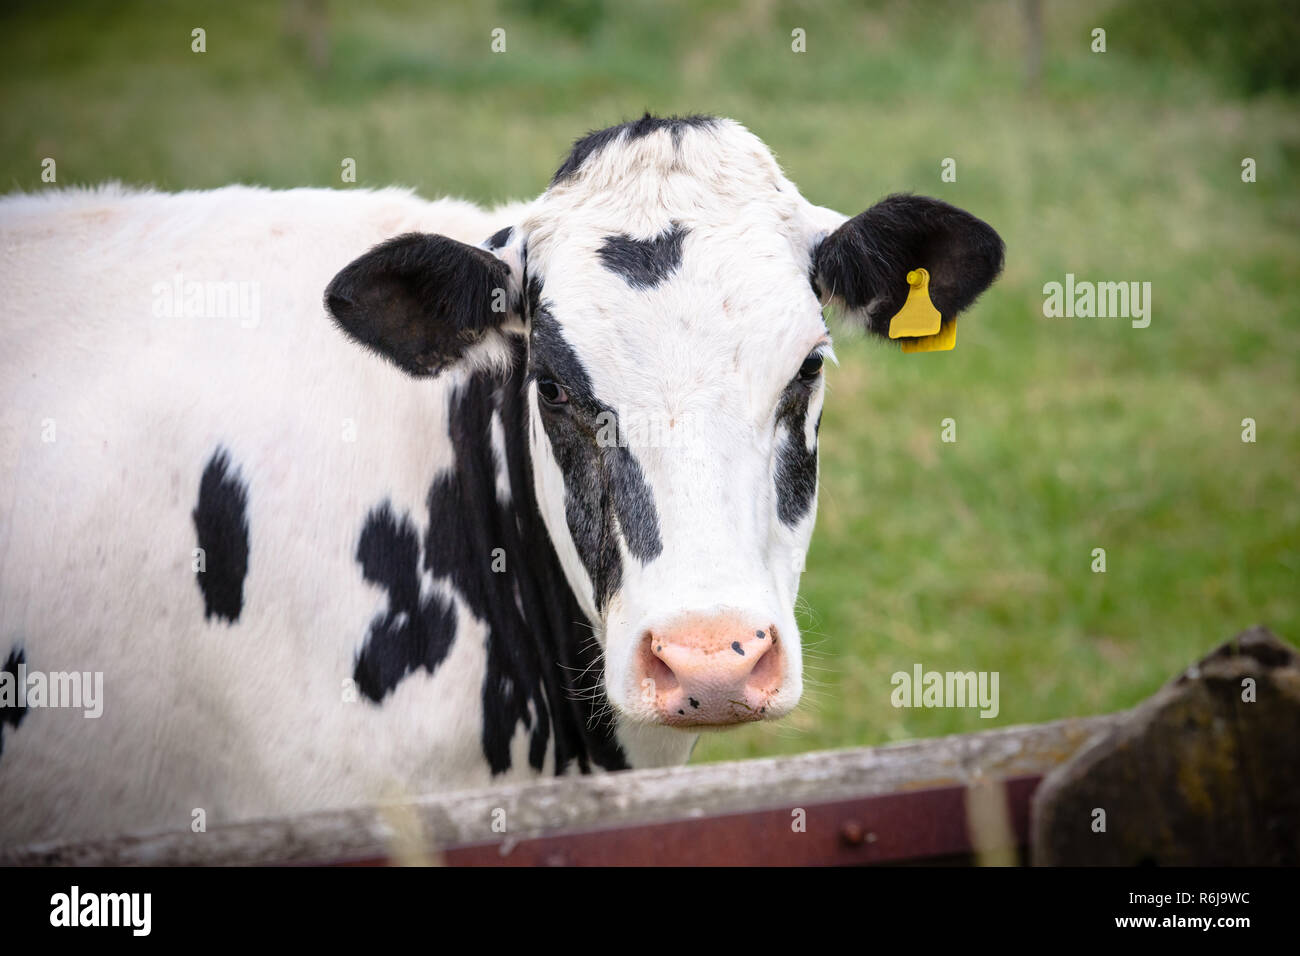 The head of the cunning cow in close-up, with yellow identification tags in the ears. Standing behind a wooden fence of a meadow or grassland Stock Photo